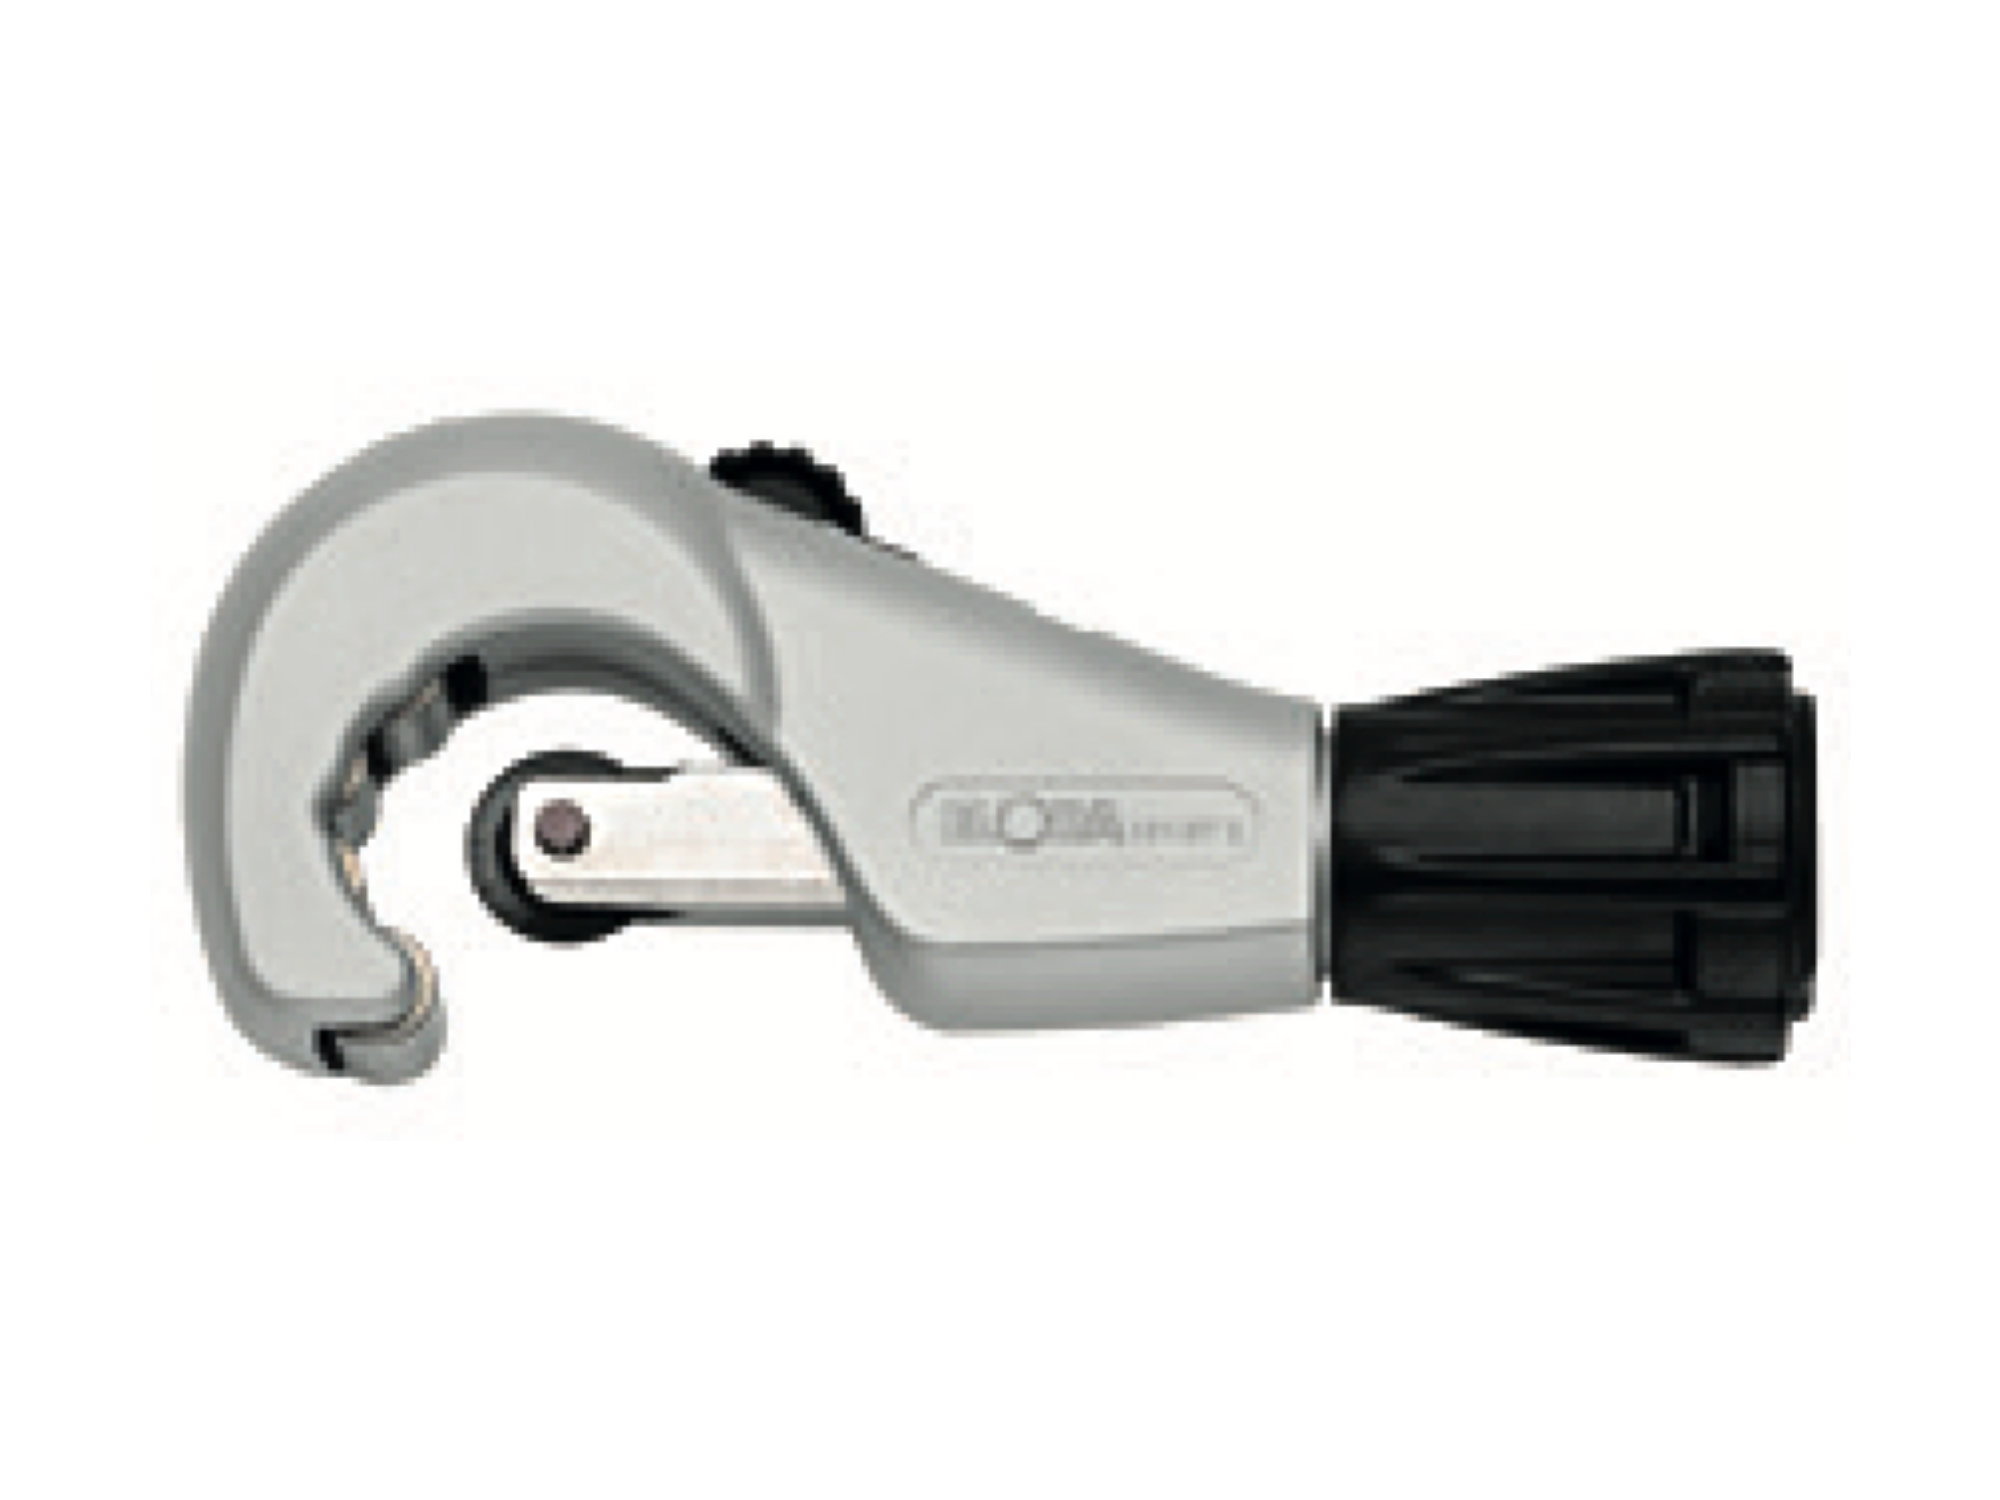 ELORA 181-ST S3 Pipe Cutter Spare Cutting Wheel (ELORA Tools) - Premium Pipe Cutter from ELORA - Shop now at Yew Aik.